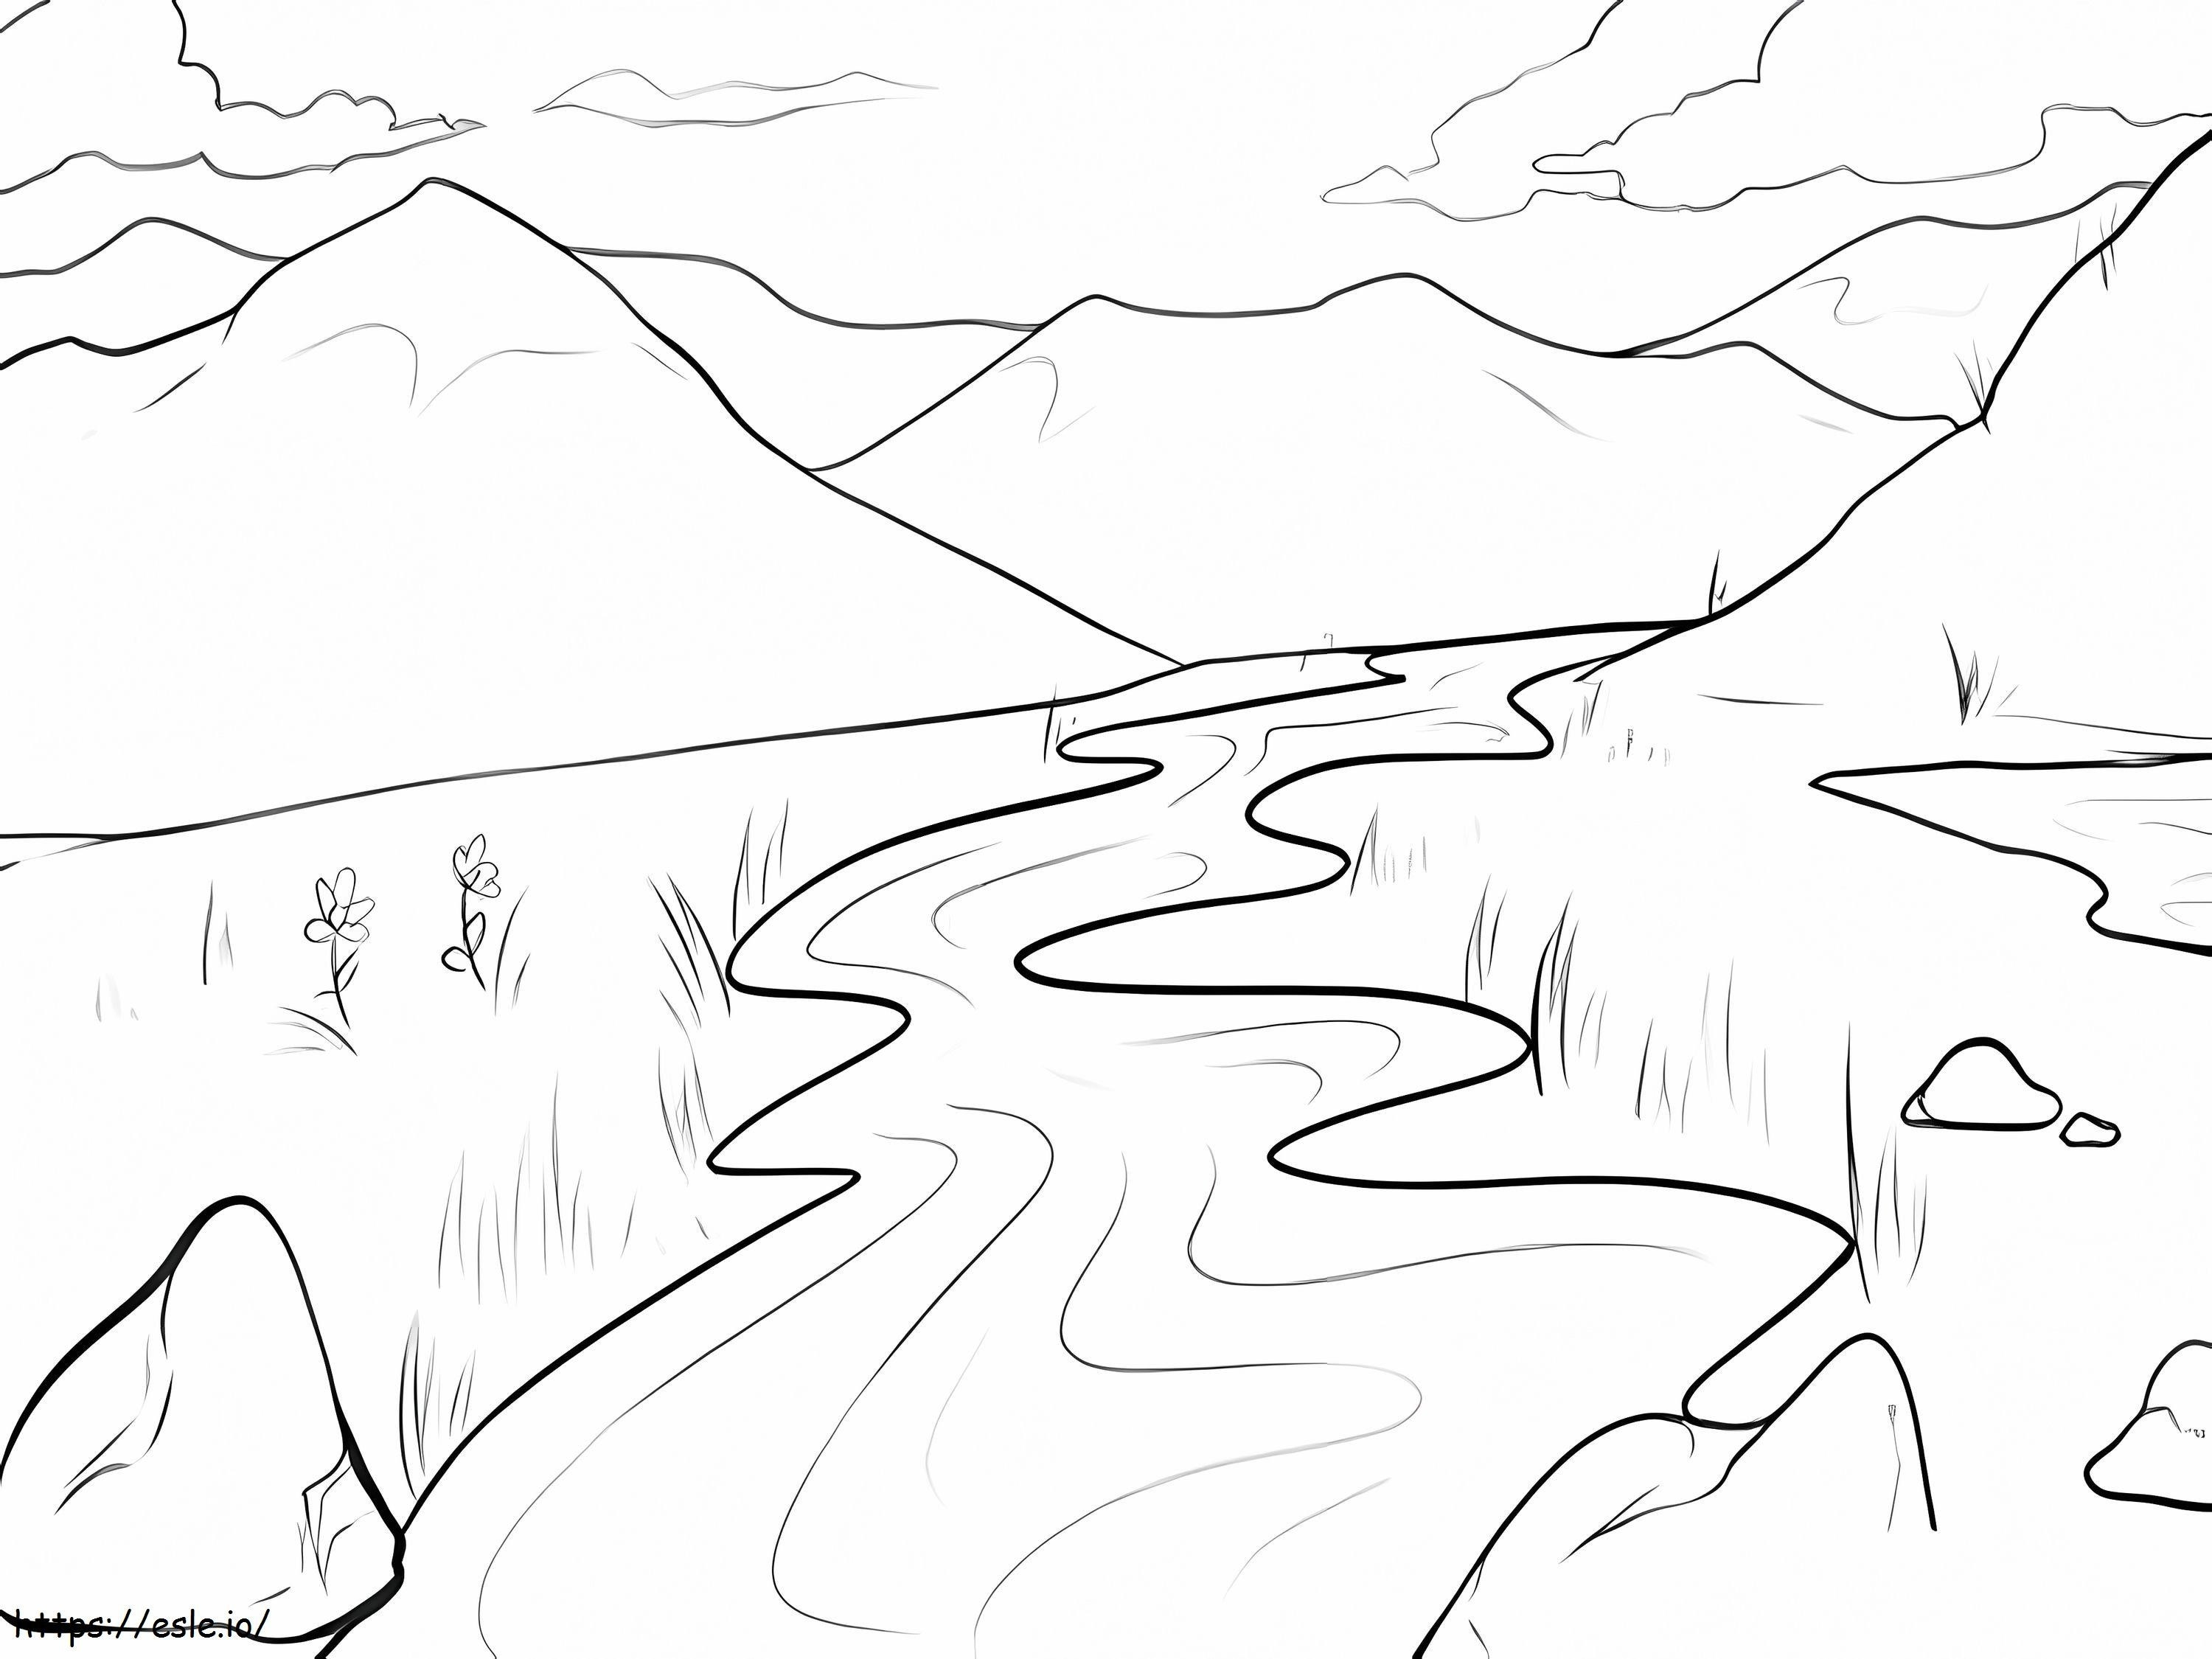 Free River coloring page